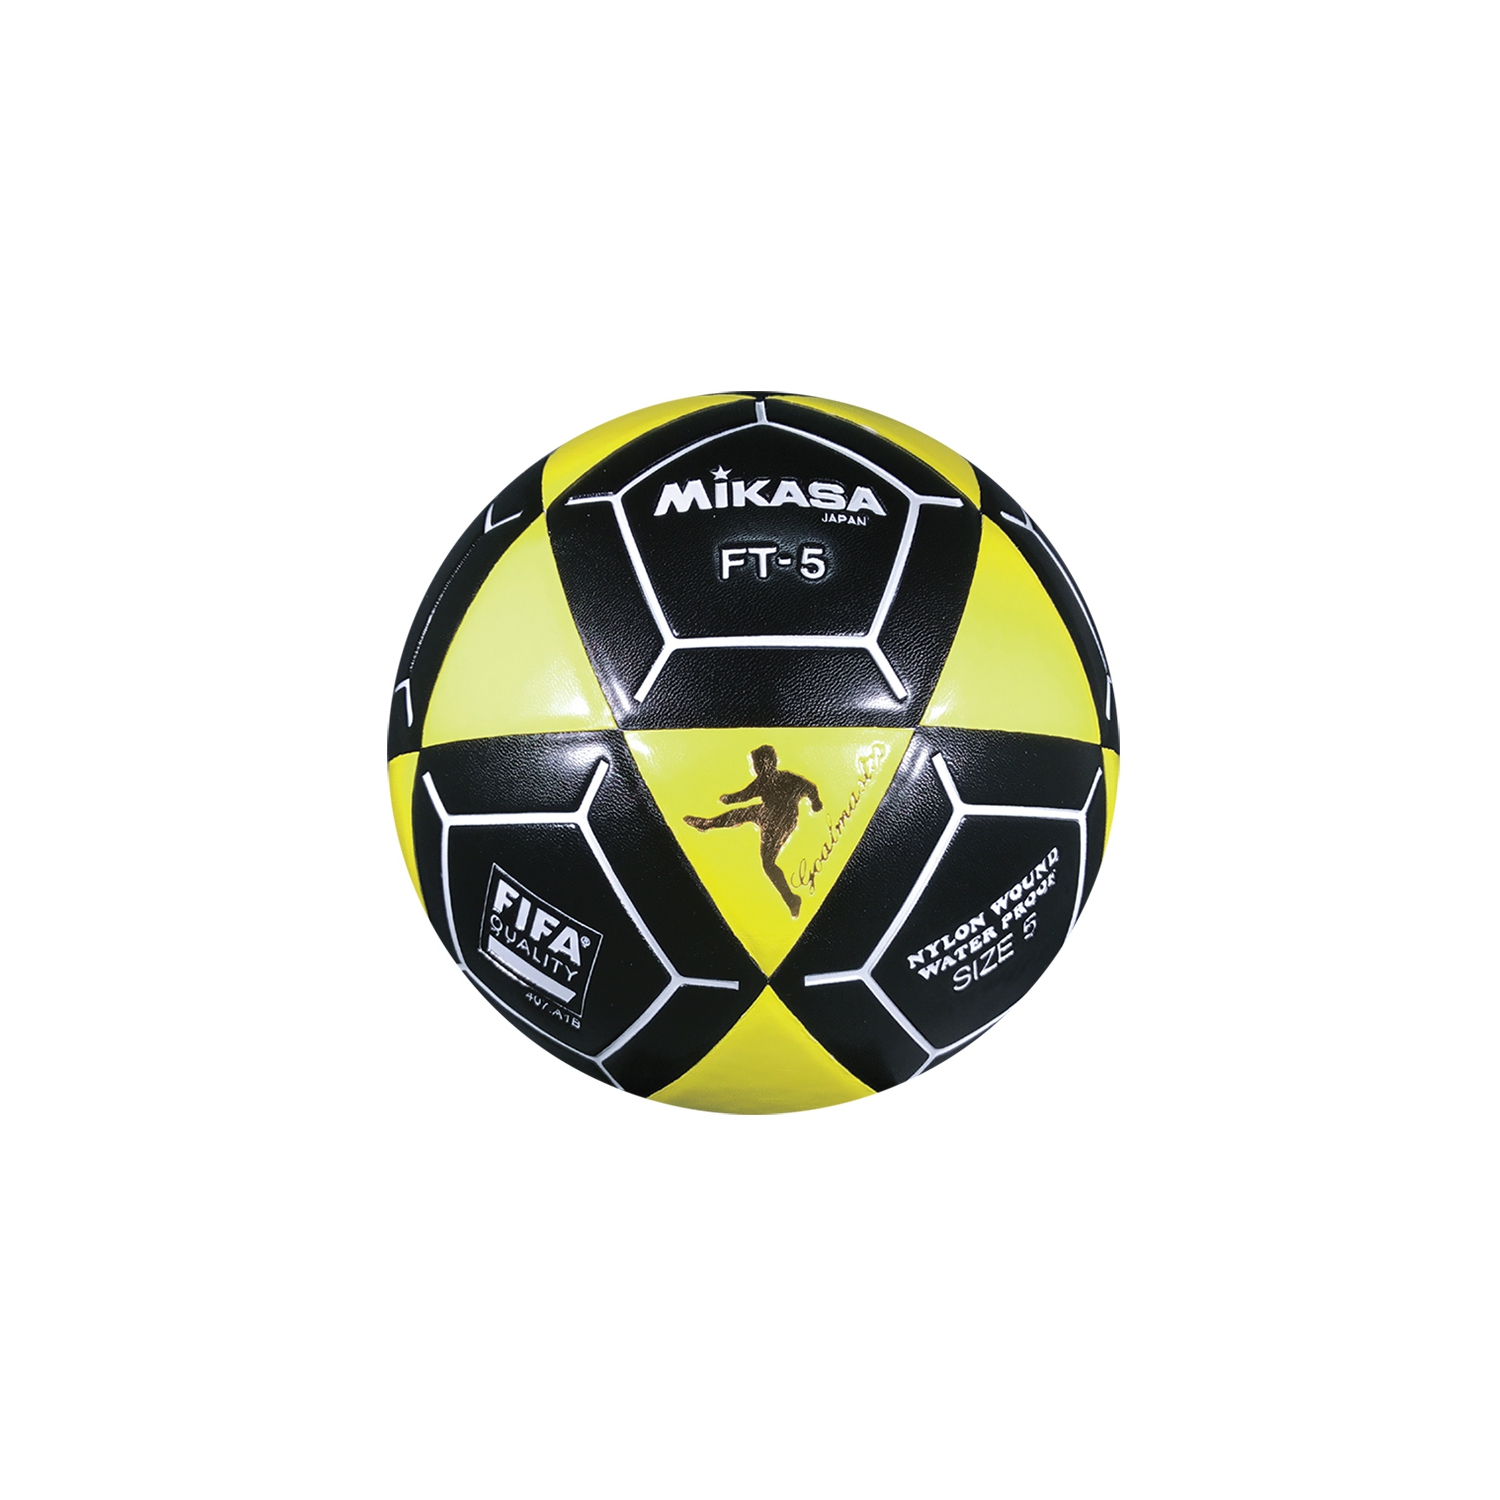 Mikasa Goal Master Soccer Ball - FT-5 Official FIFA and NFA Footvolley Size 5, Yellow/Black